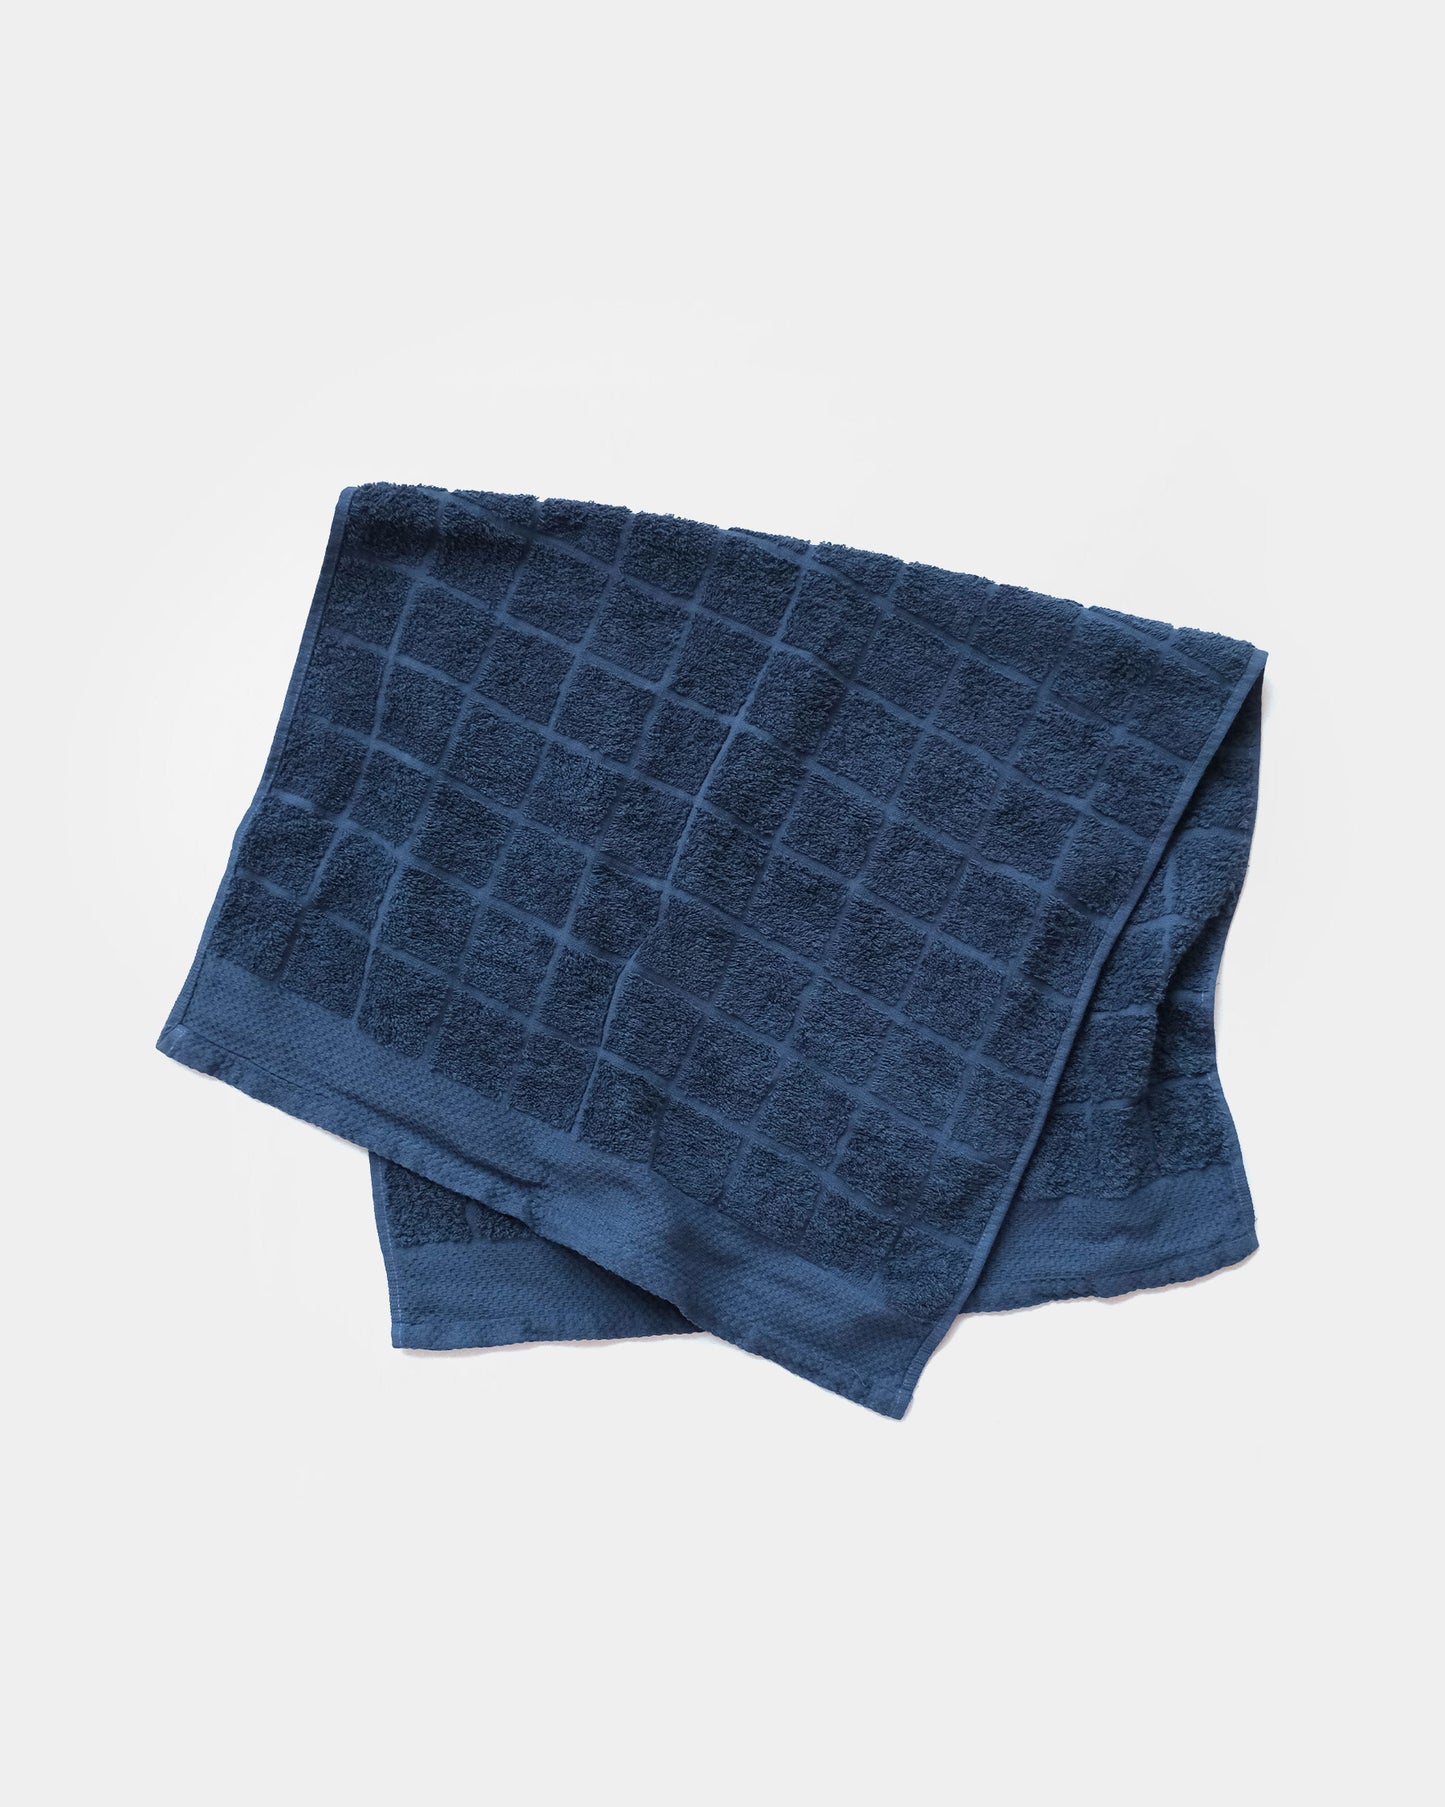 Over-Dyed Cotton Towel Made In Italy